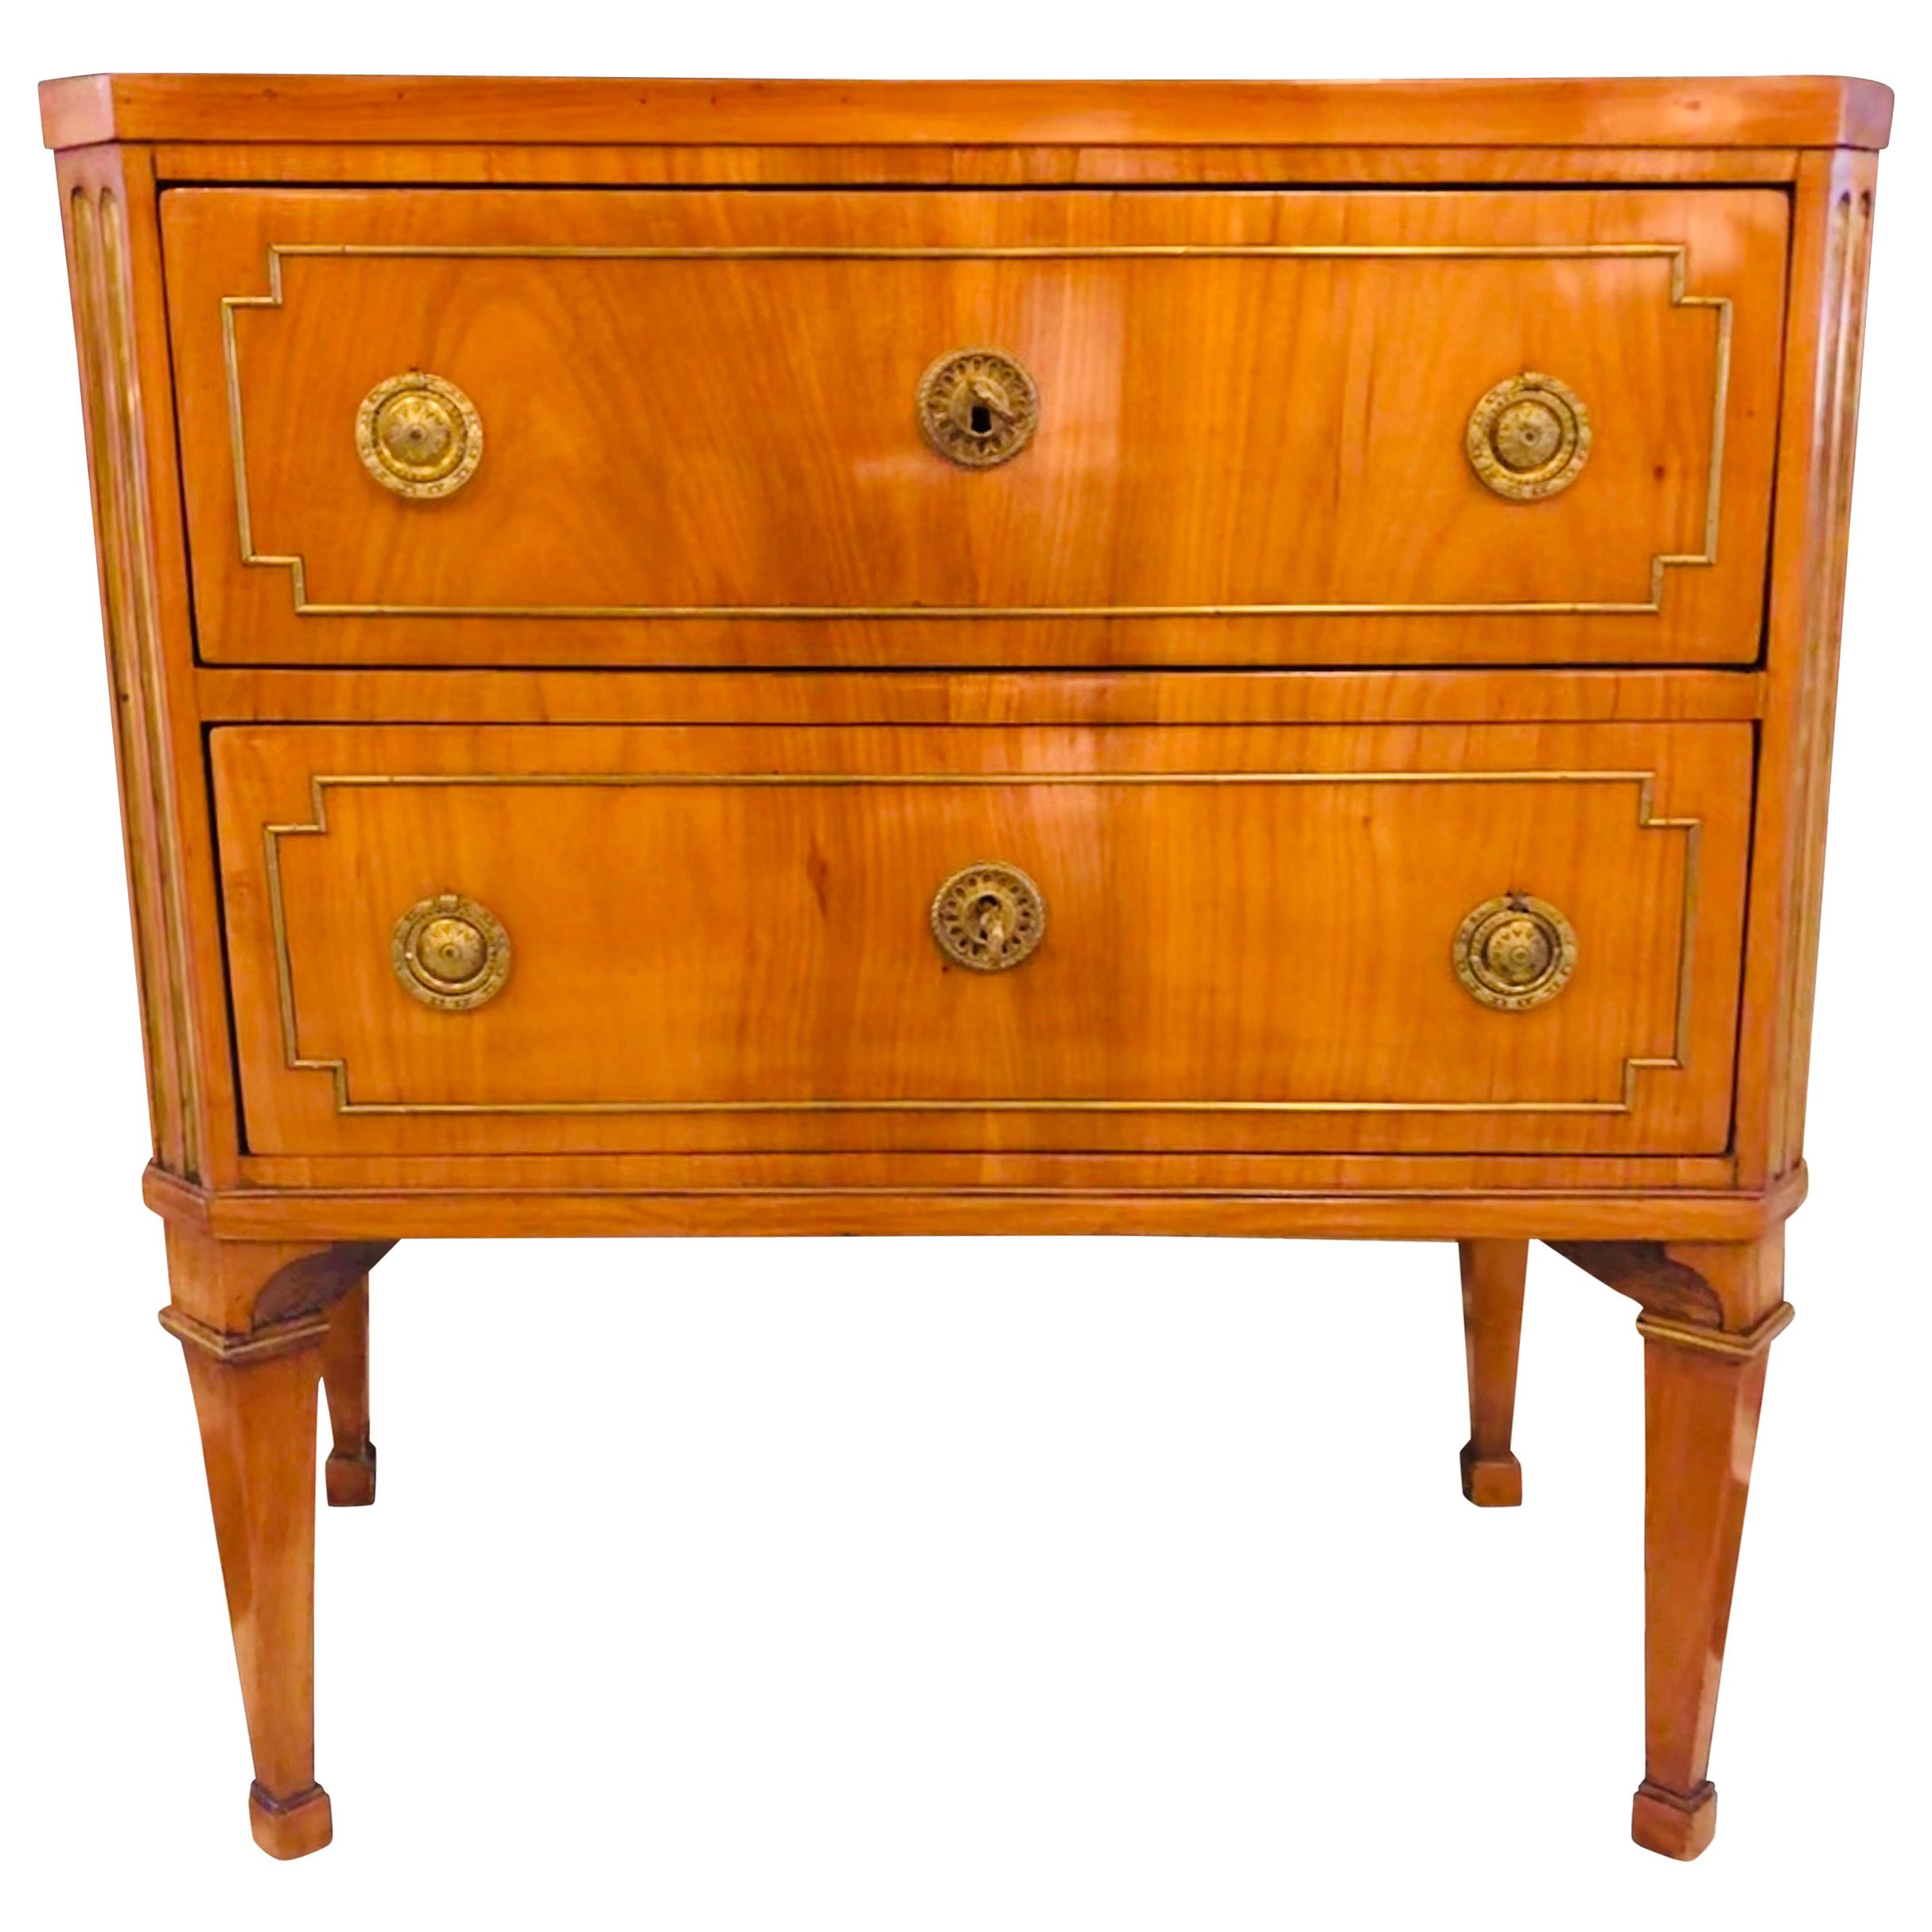 Empire Commode Classicism 1770 from Castle Bellevue, White House of Germany For Sale